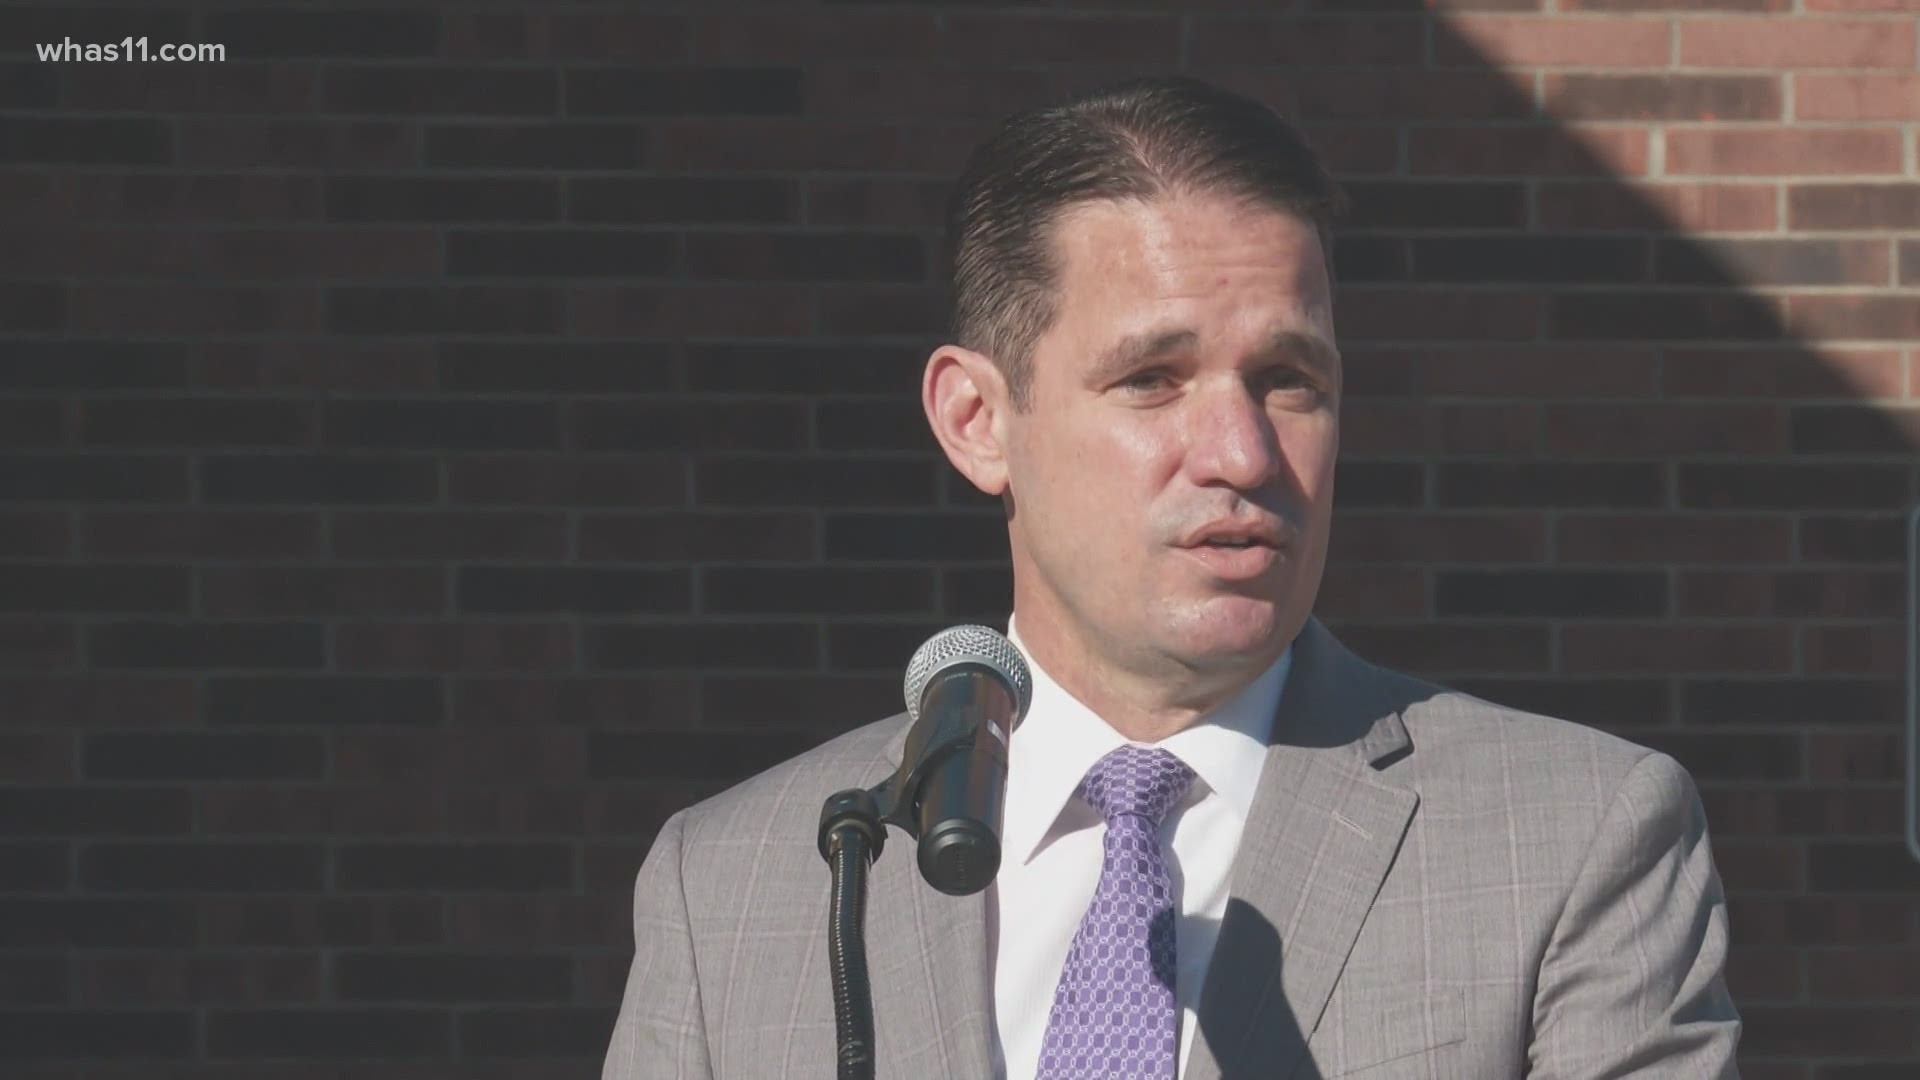 Superintendent Marty Pollio says Louisville's COVID-19 data is going in the wrong direction.